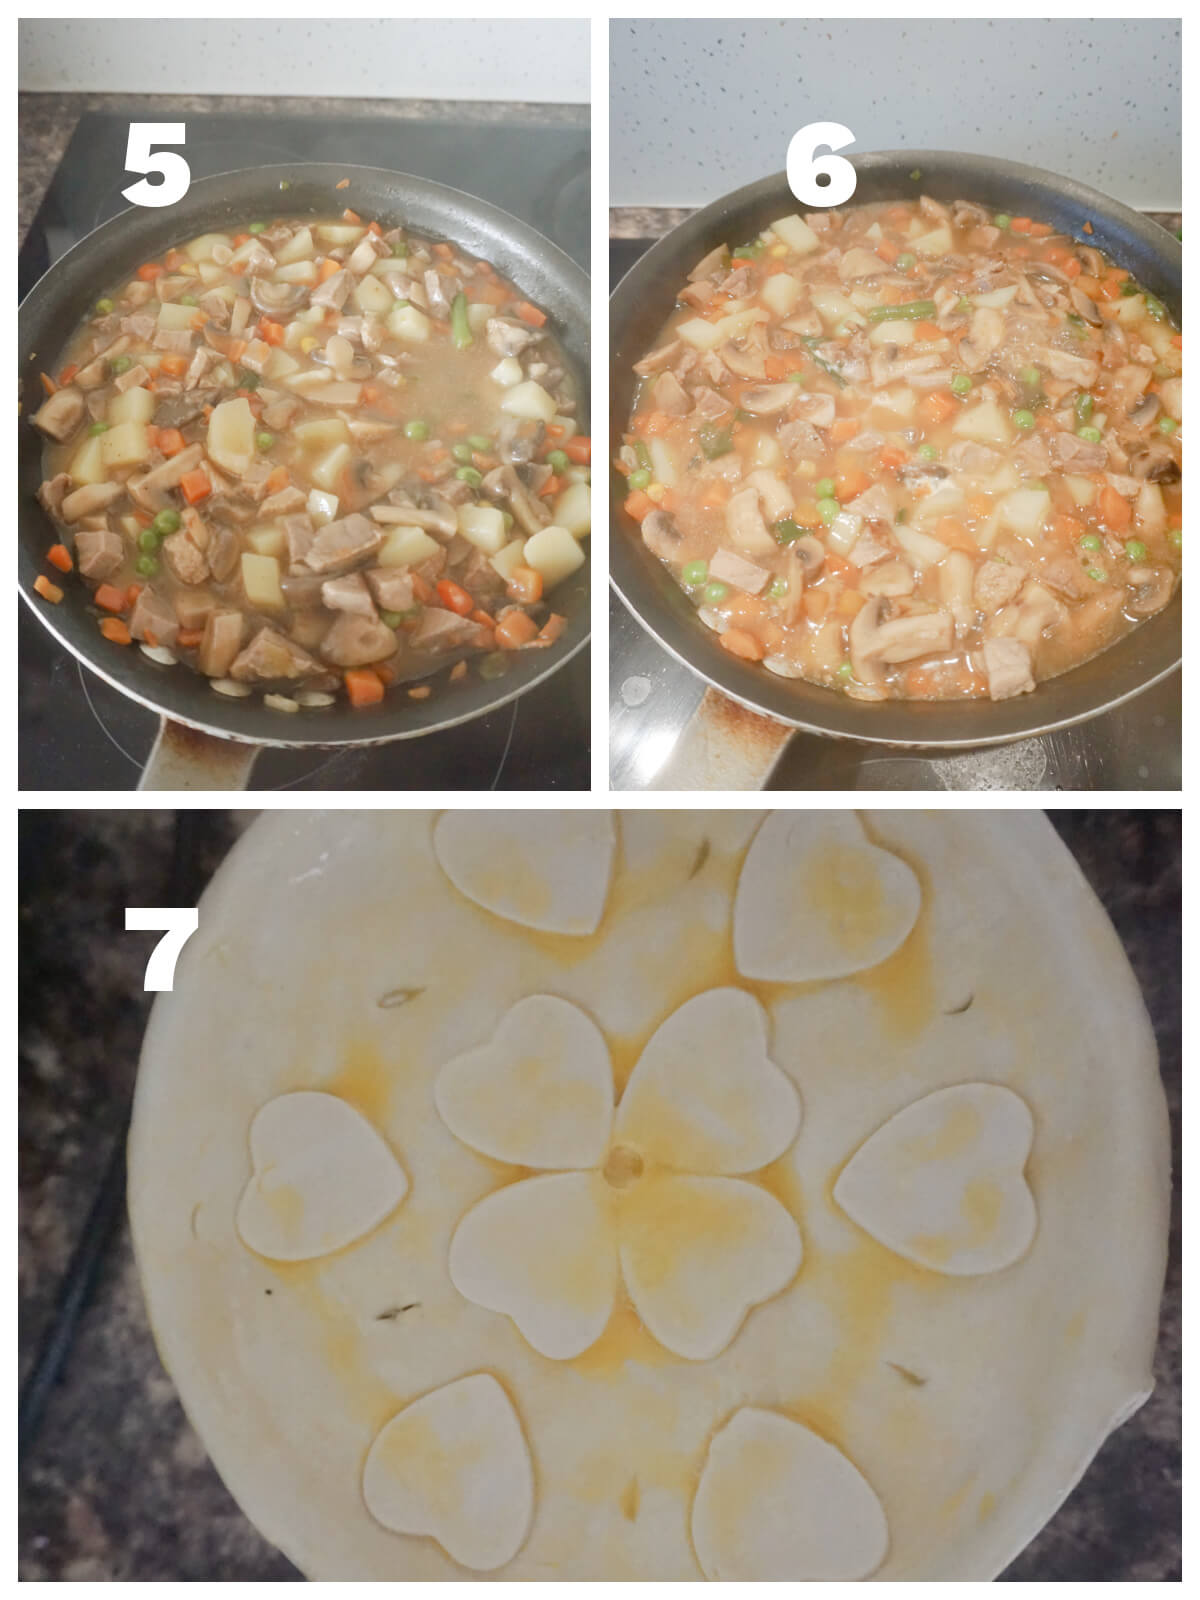 Collage of 3 photos to show how to assemble the beef pie.